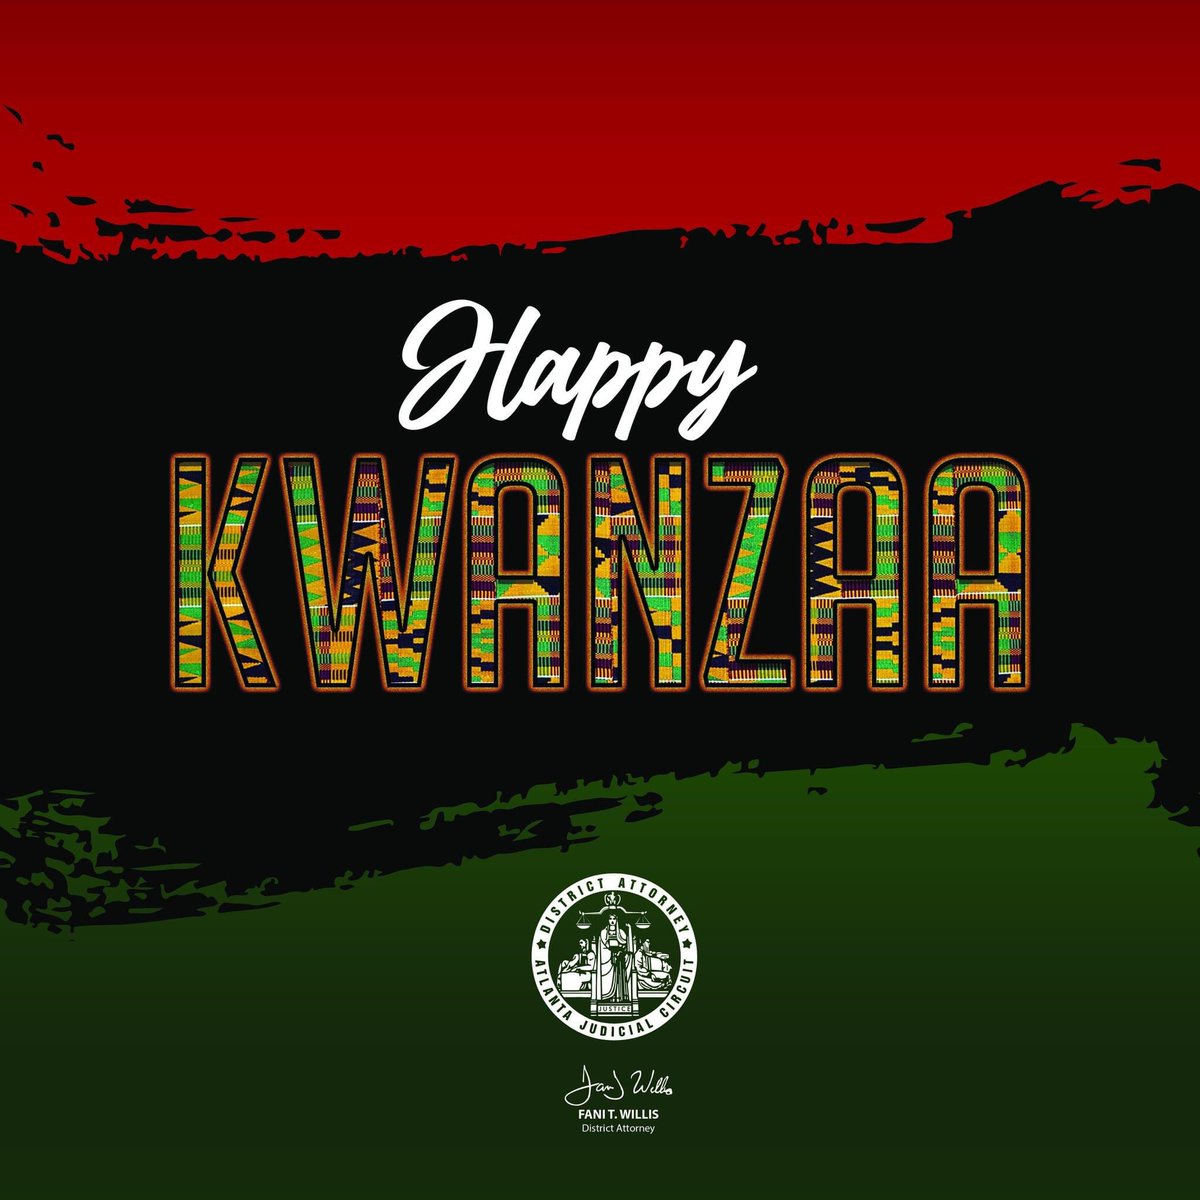 From the Fulton County District Attorney's Office and DA Fani Willis, may this Kwanzaa season bring renewed inspiration and shared moments of reflection on the principles that strengthen us all. Happy Kwanzaa! #HappyKwanzaa #FultonCounty #FultonCountyDA